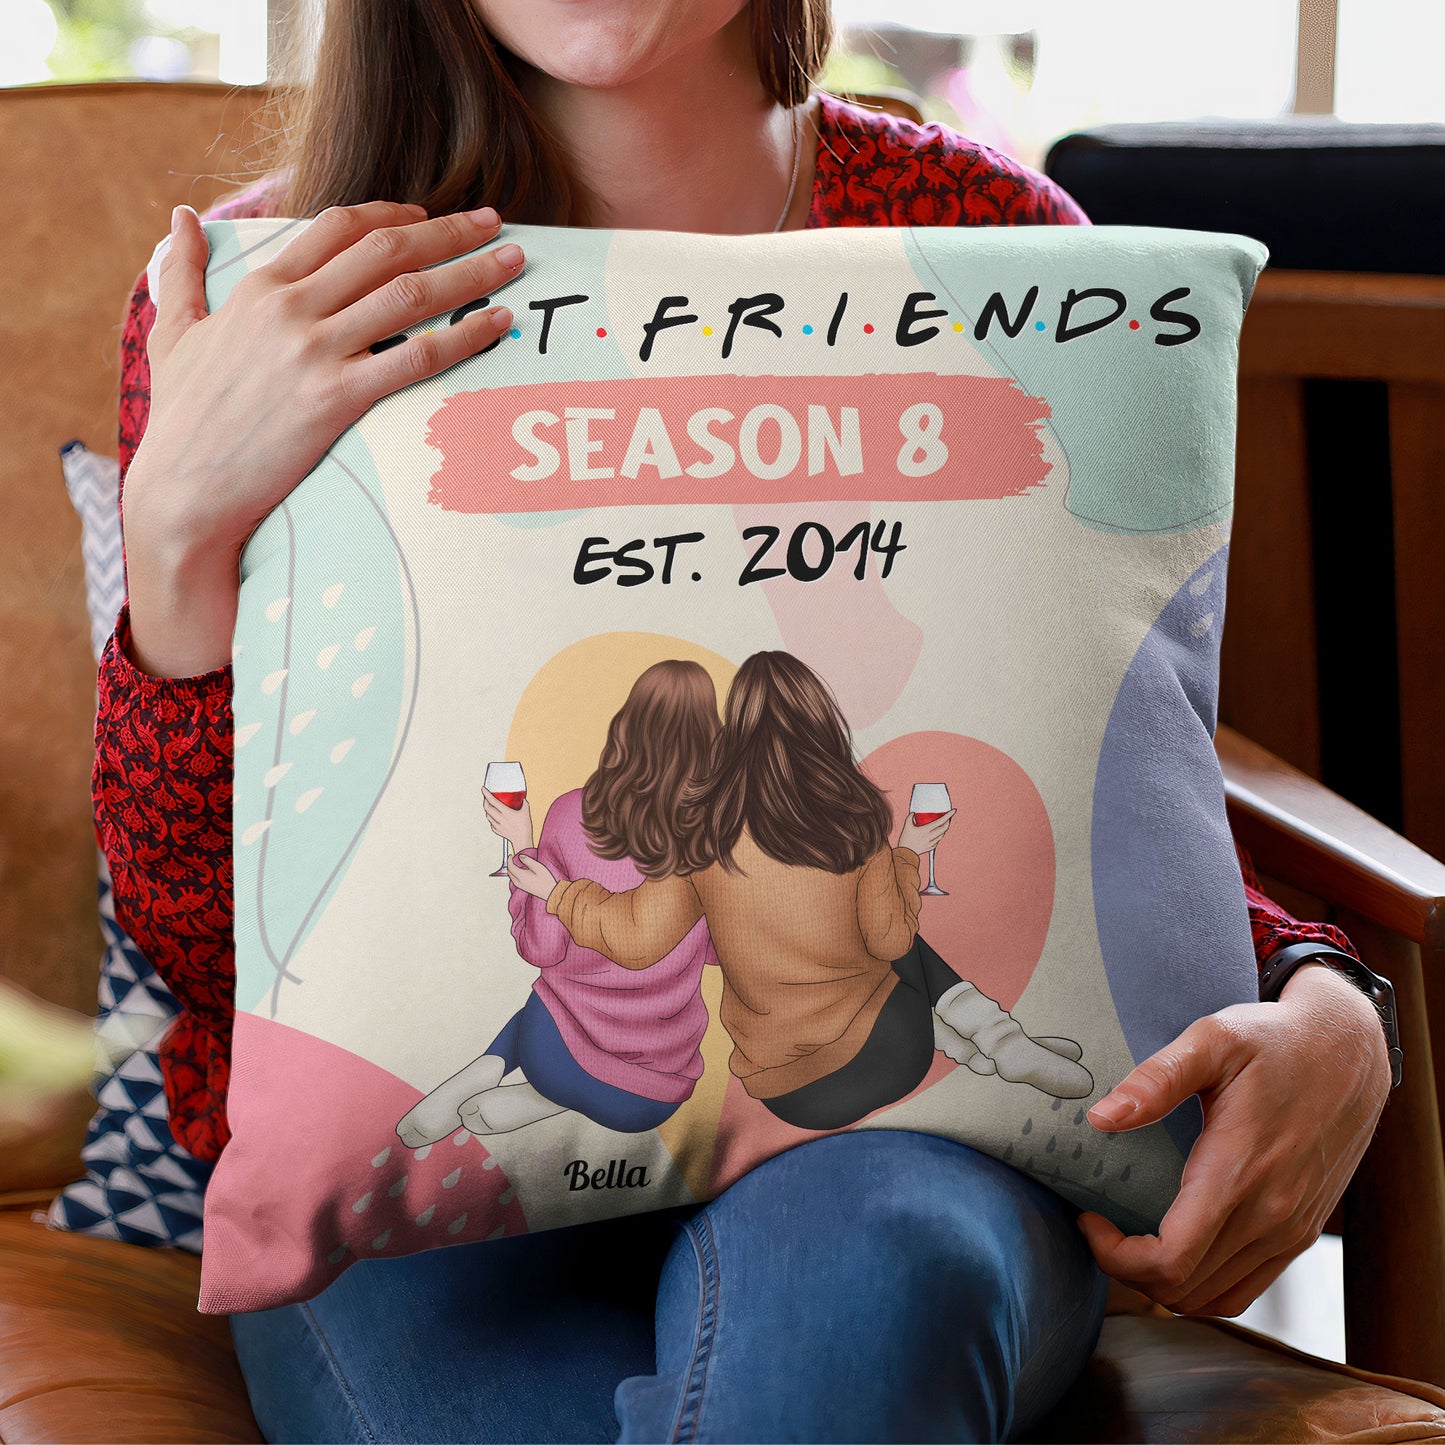 Best Friends Season 8 - Personalized Pillow (Insert Included) - Funny Birthday Friendship Gifts For Besties, BFF, Best Friends, Soul Sisters